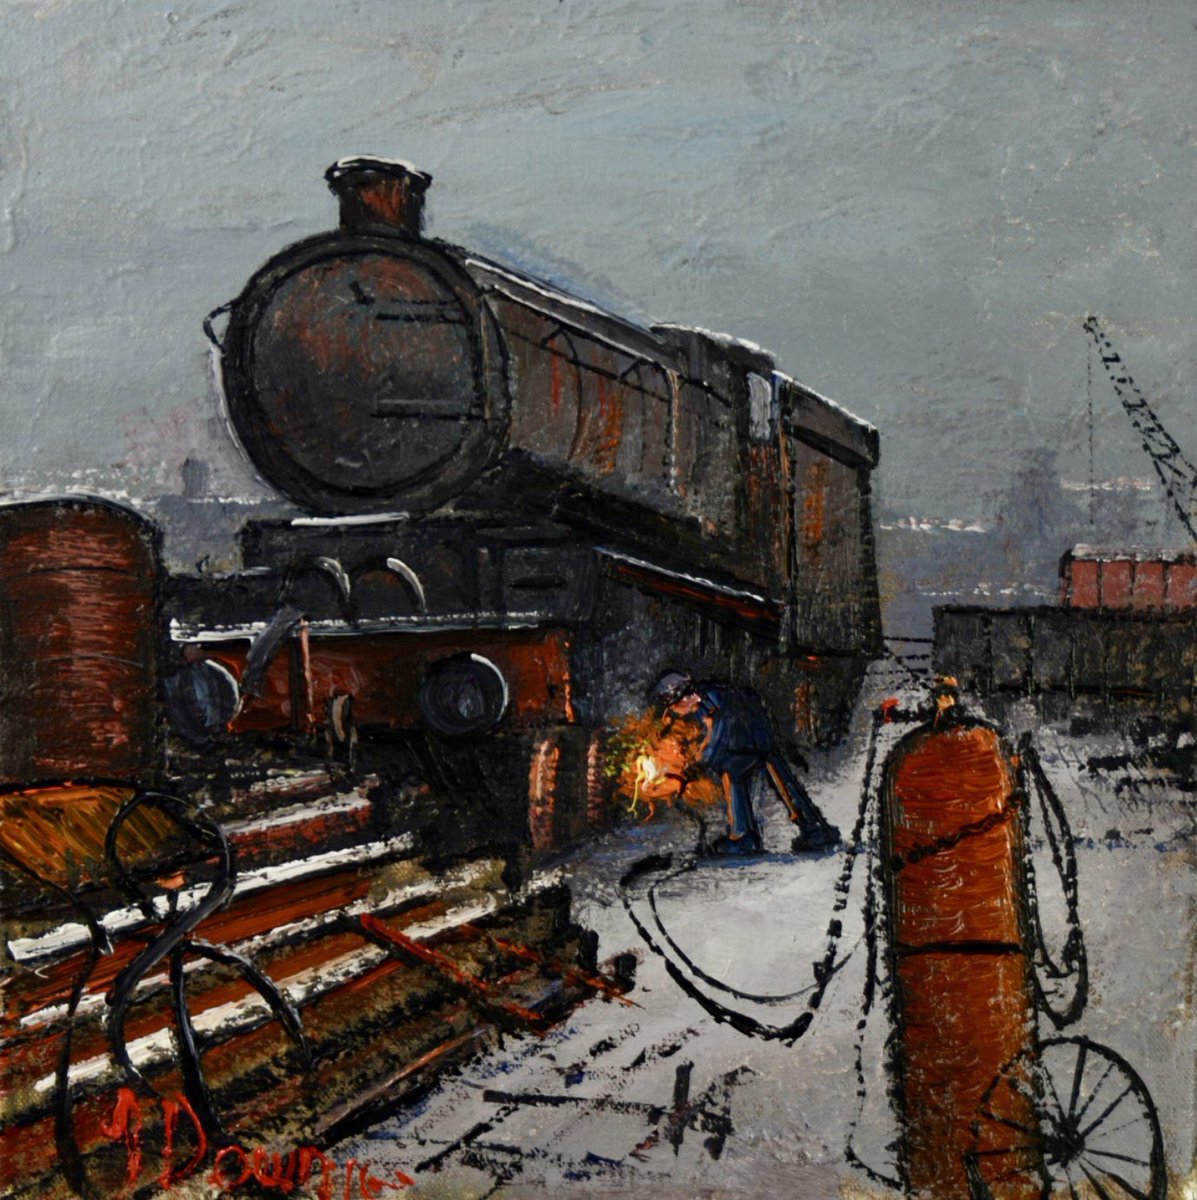 Posted quite a few works by James Downie (b.1949), but think this one of an old, steam locomotive receiving some tender loving care from a welder is definitely a Top 5 Contender 🏆😍 #AcrylicPainting #Art #TransportArt #Trains #Railways #IndustrialArt